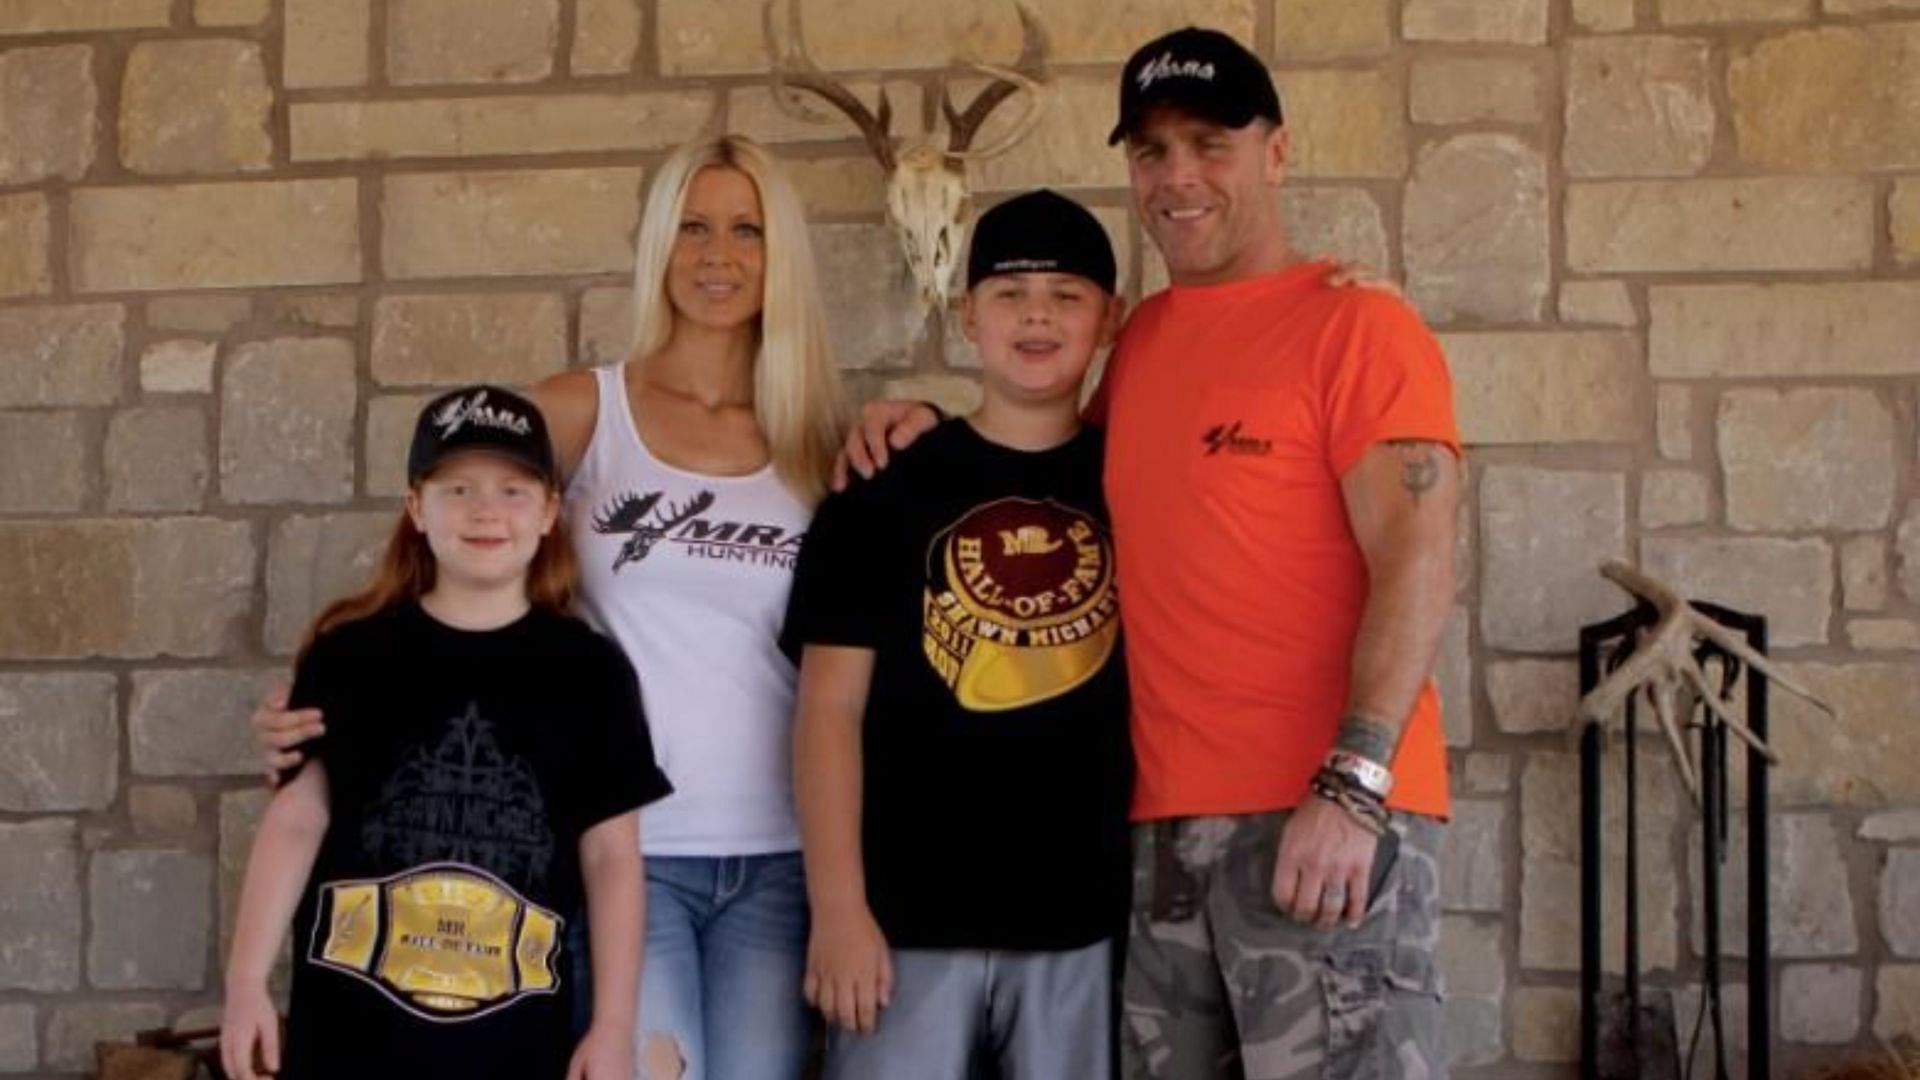 WWE Hall of Famer Shawn Michaels with his wife and children